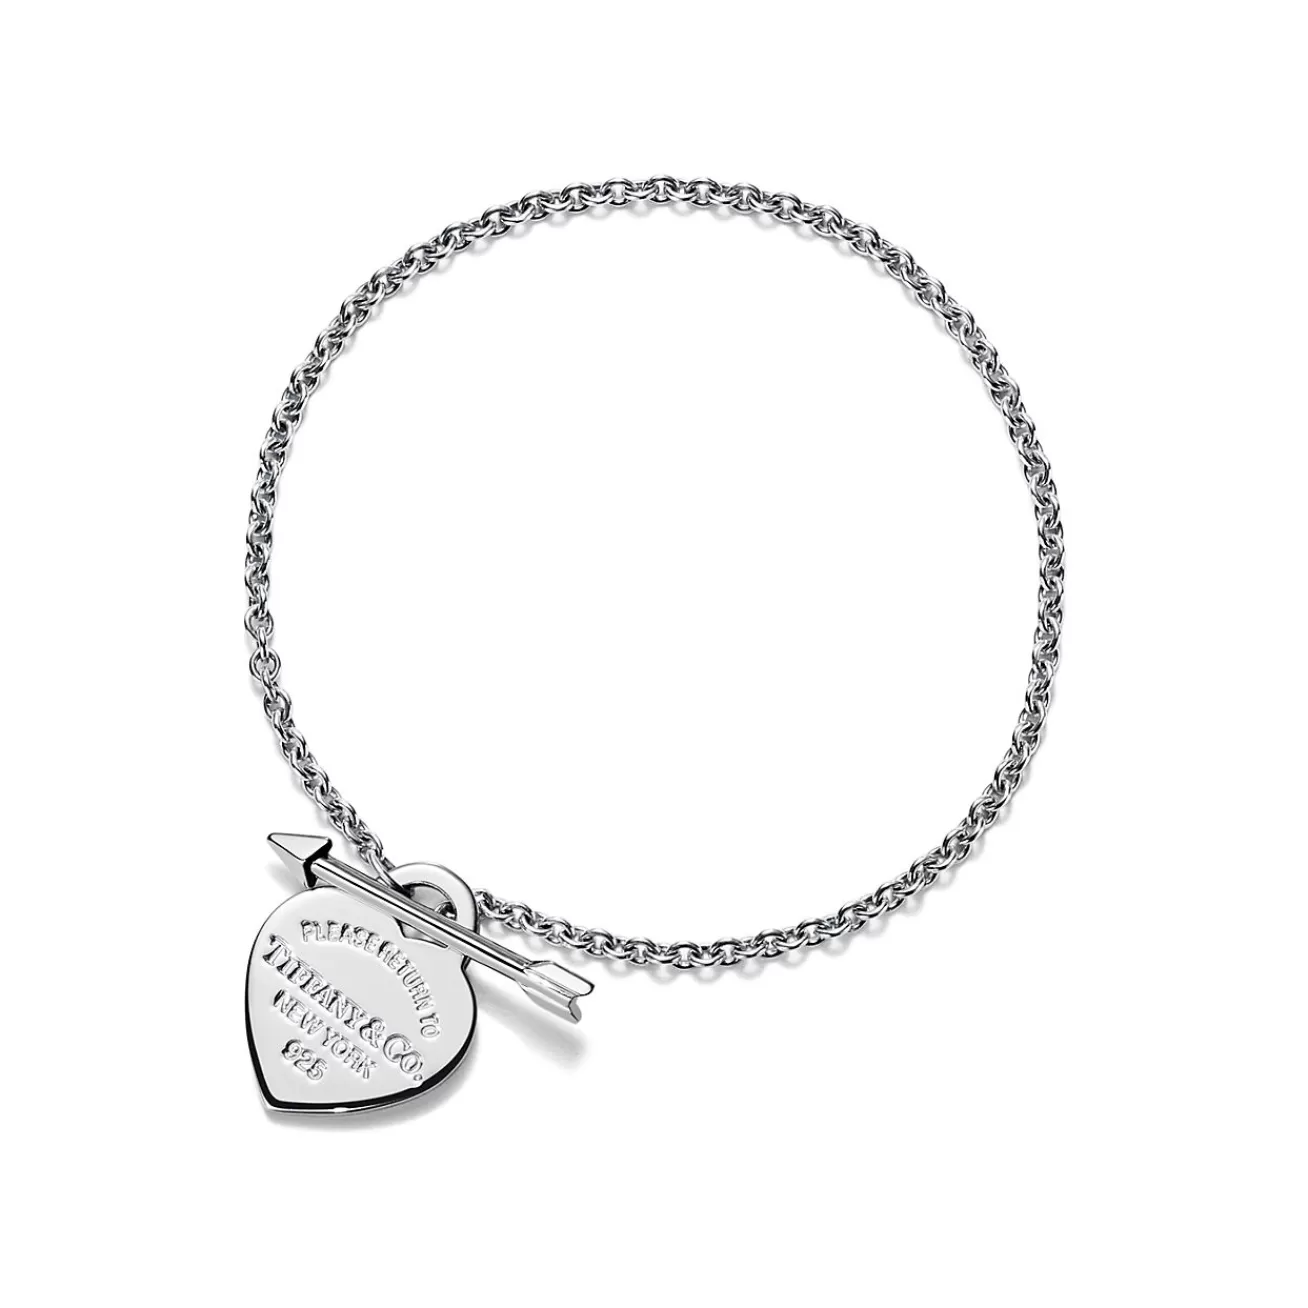 Tiffany & Co. Return to Tiffany® Lovestruck Heart Tag Bracelet in Sterling Silver, Small | ^ Bracelets | Gifts for Her